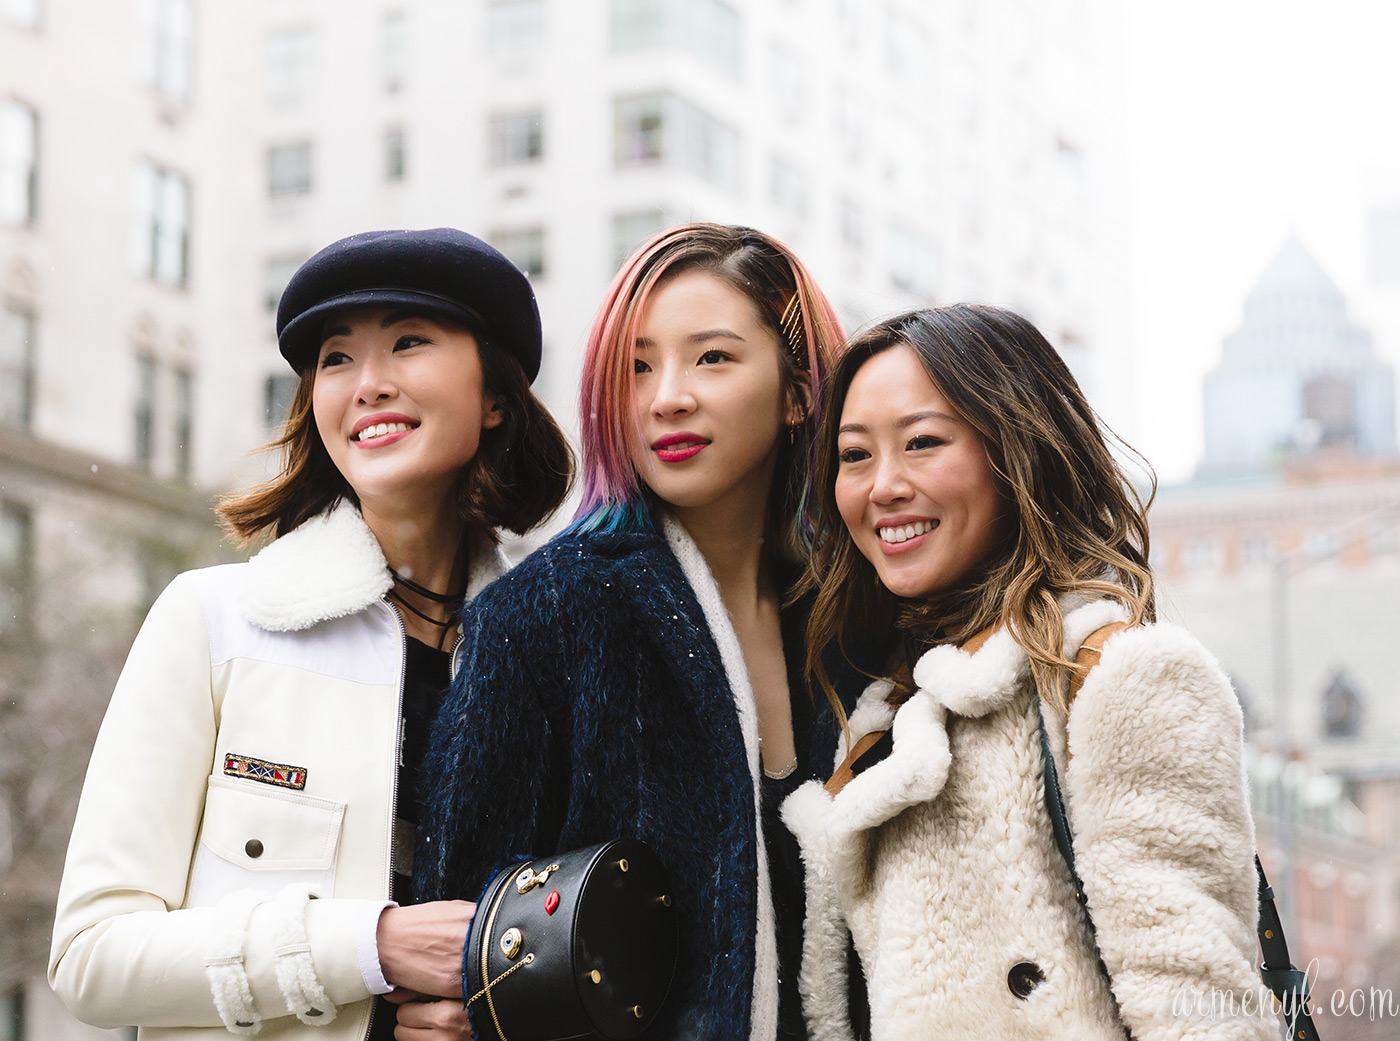 Chriselle Lim, Irene Kim and Aimee Song together outside Tommy Hilfiger f/w 16 show in NYC